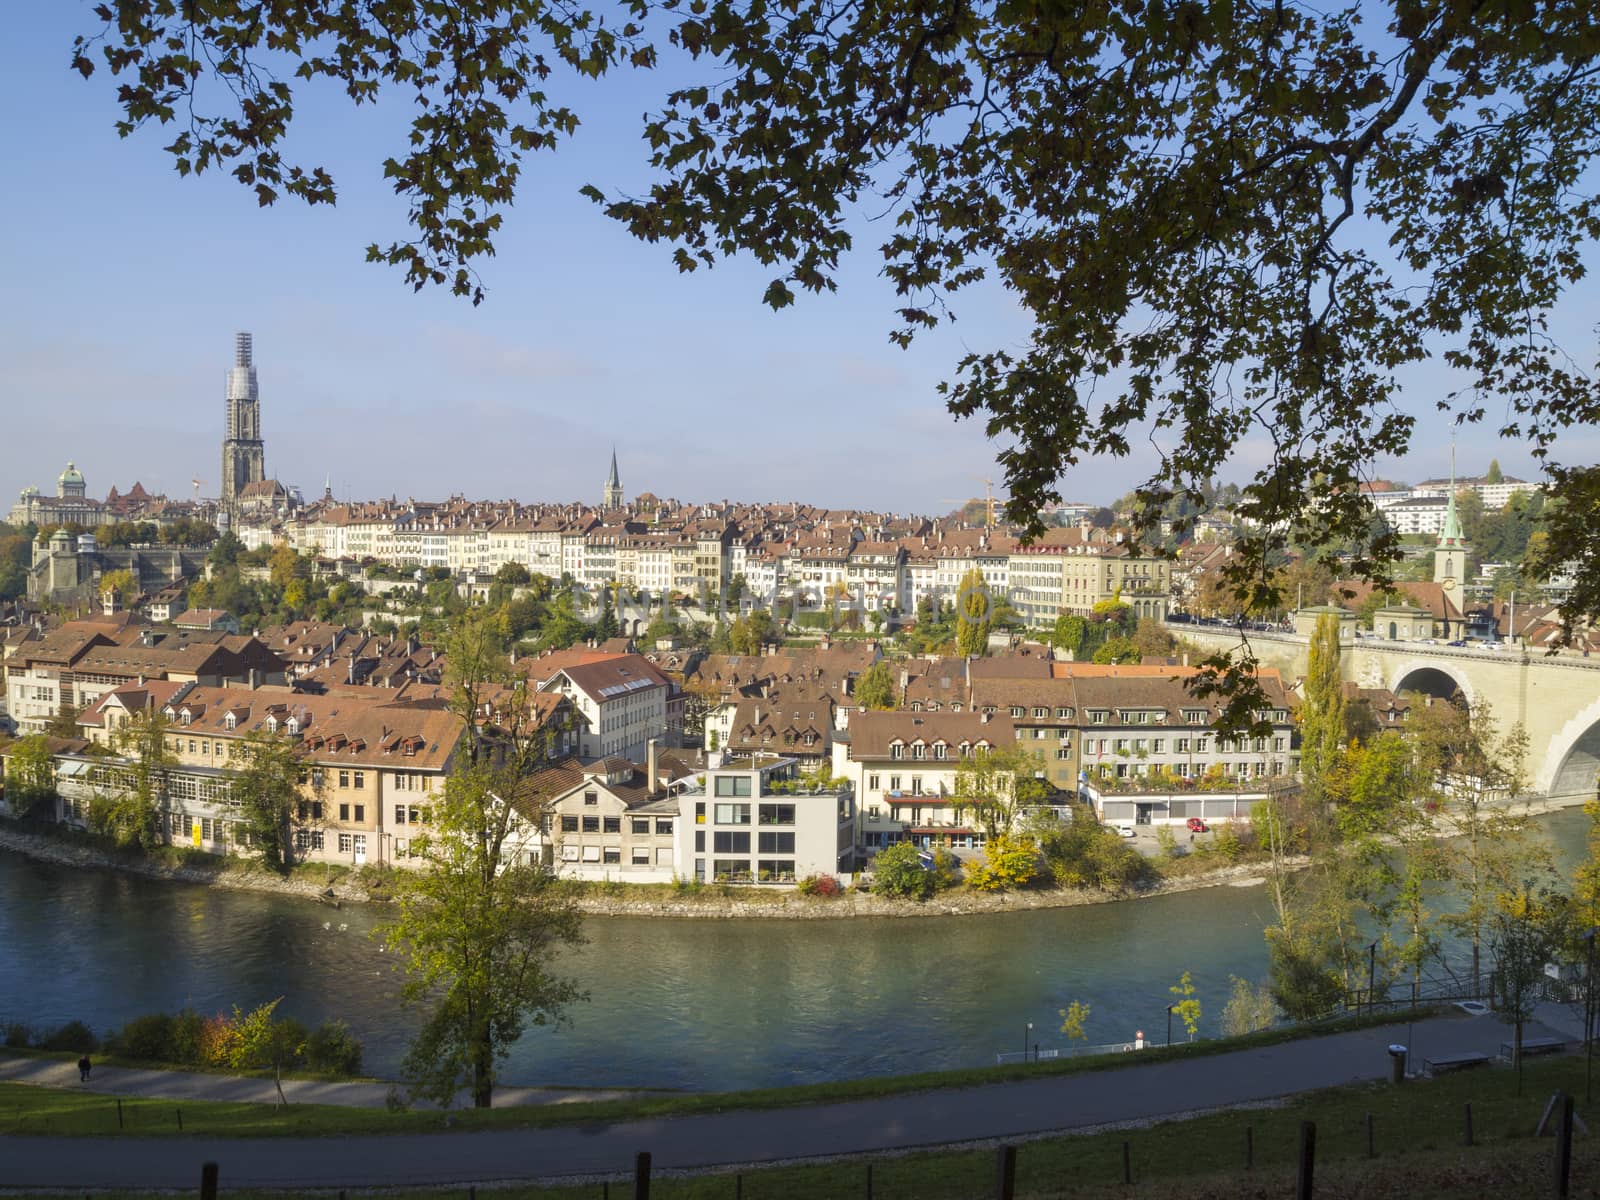 Cityscape of Bern or Berne, the capital city of Switzerland. In 1983 the historic old town in the centre of Bern became a UNESCO World Heritage Site.